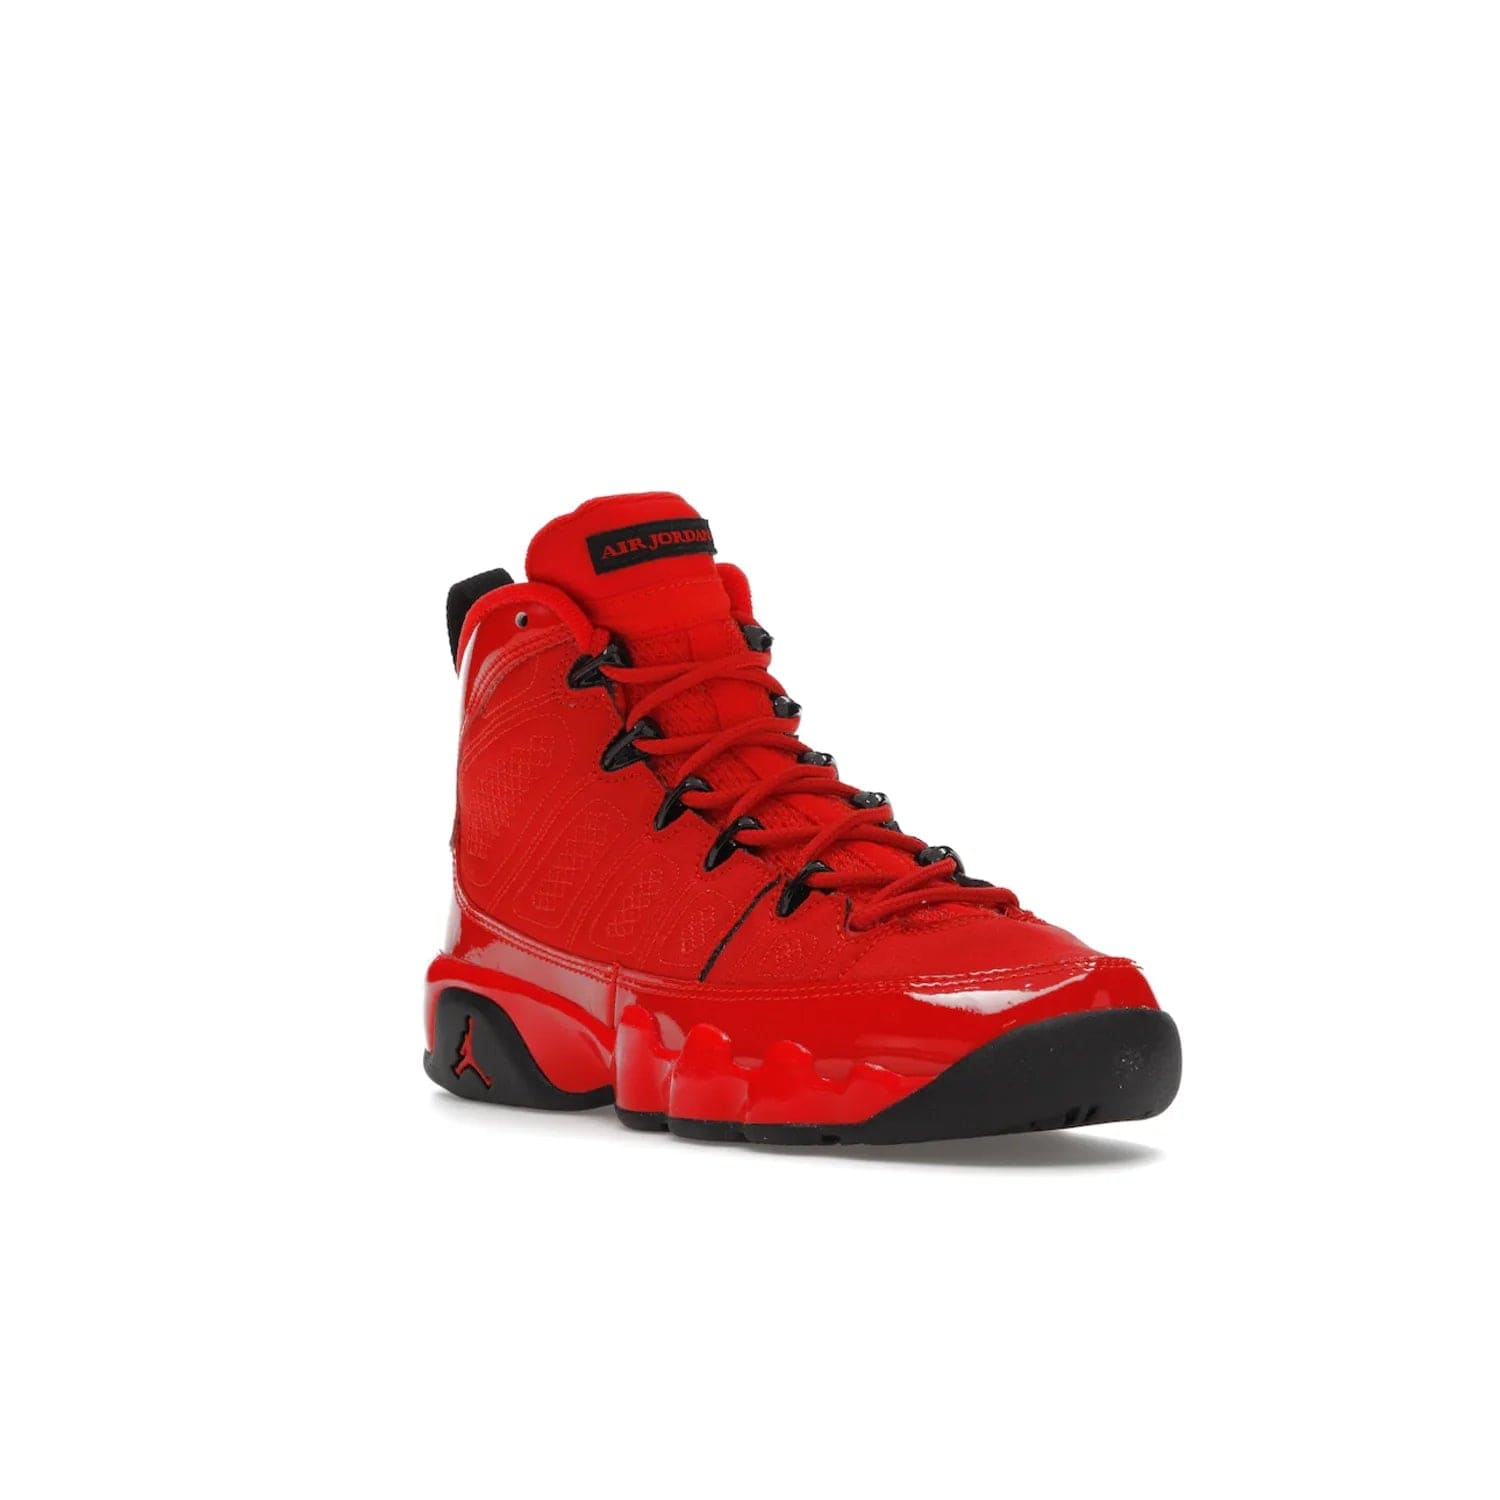 Jordan 9 Retro Chile Red (GS) - Image 6 - Only at www.BallersClubKickz.com - Introducing the Air Jordan 9 Retro Chile Red (GS), a vintage 1993 silhouette with fiery colorway. Features quilted side paneling, glossy patent leather, pull tabs, black contrast accents, and foam midsole. Launching May 2022 for $140.